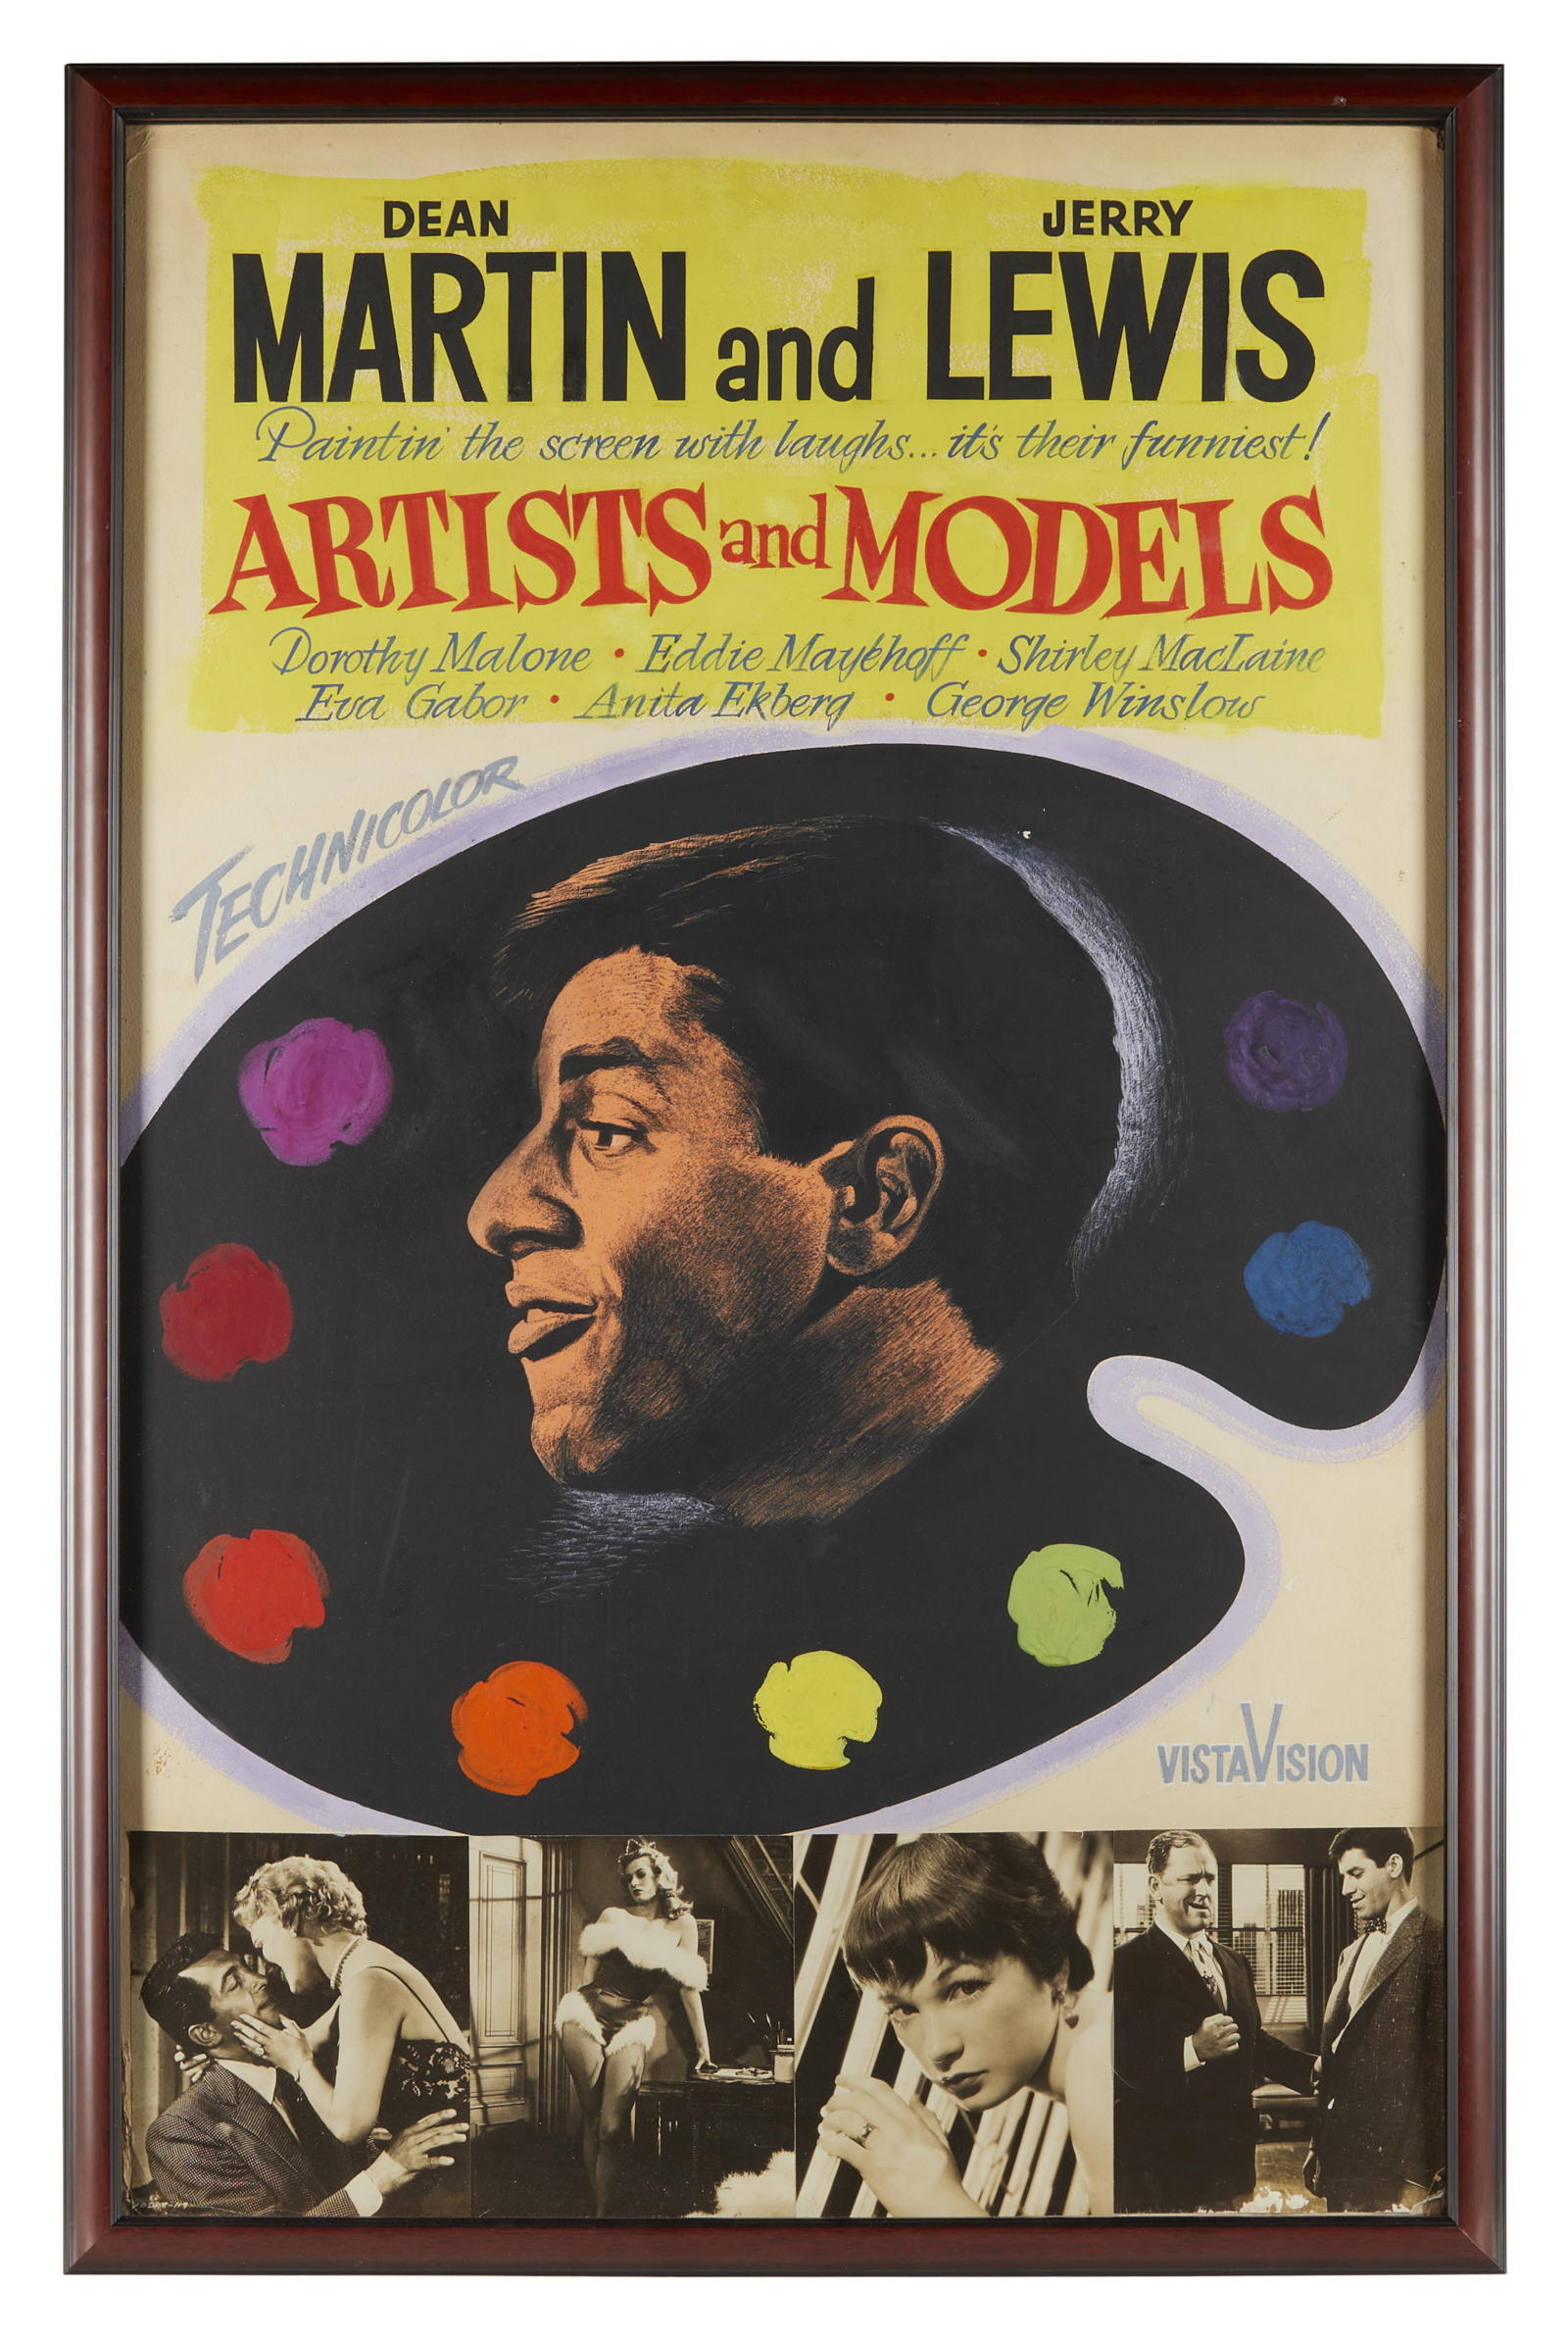 Attr. Lomasney "Artists and Models" Movie Painting - Image 3 of 8